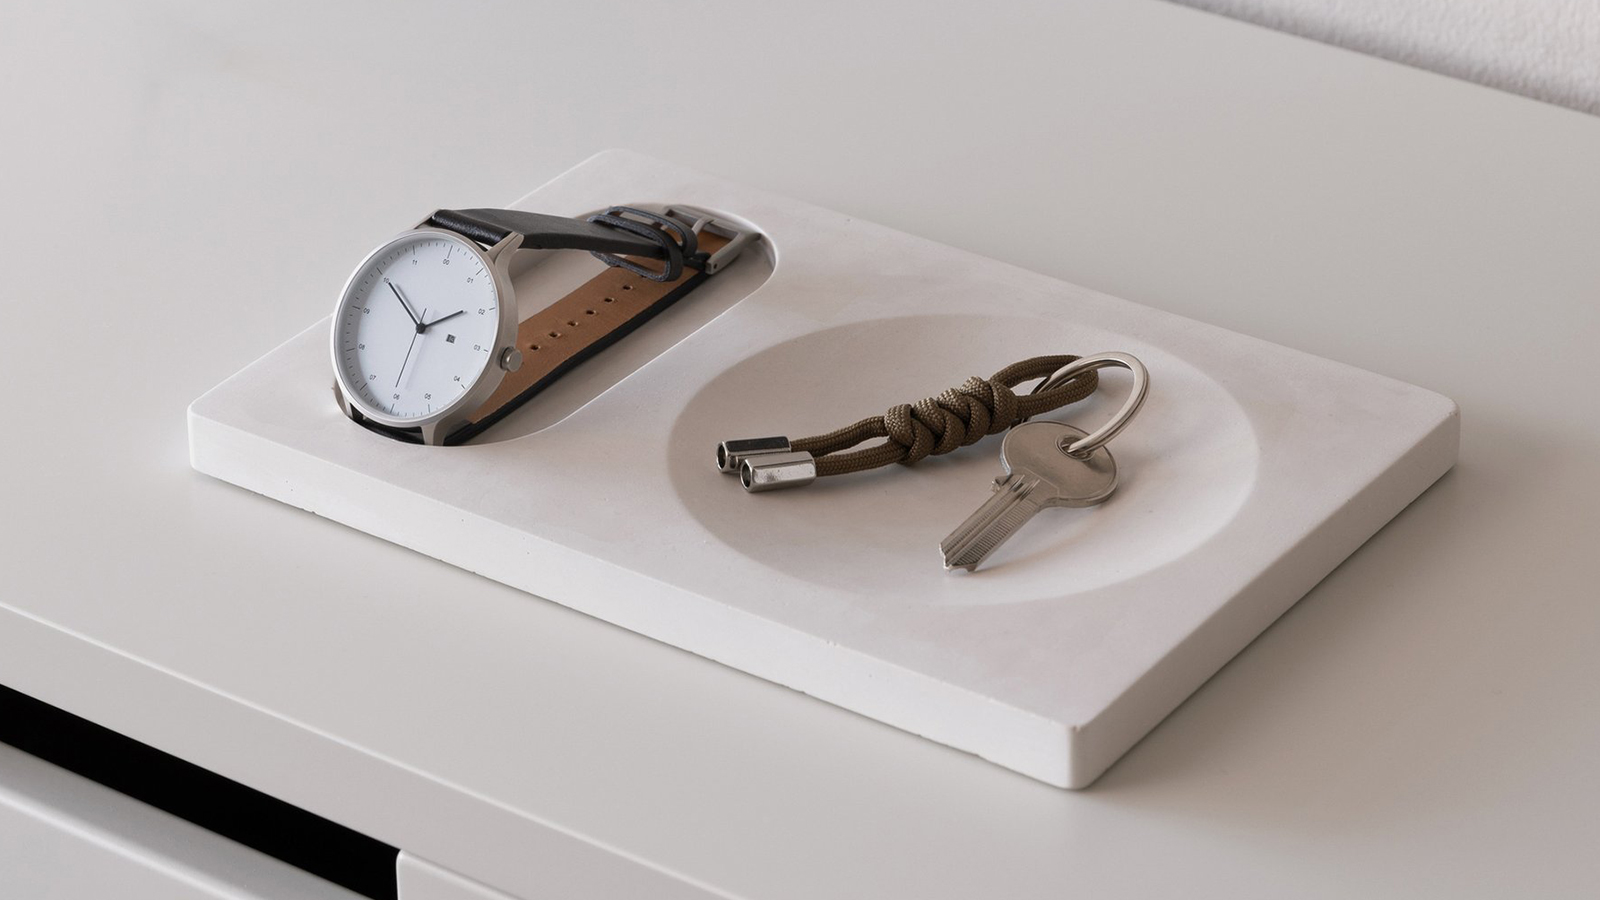 Keep Organized In Style With The Instrmnt Catch Tray - IMBOLDN